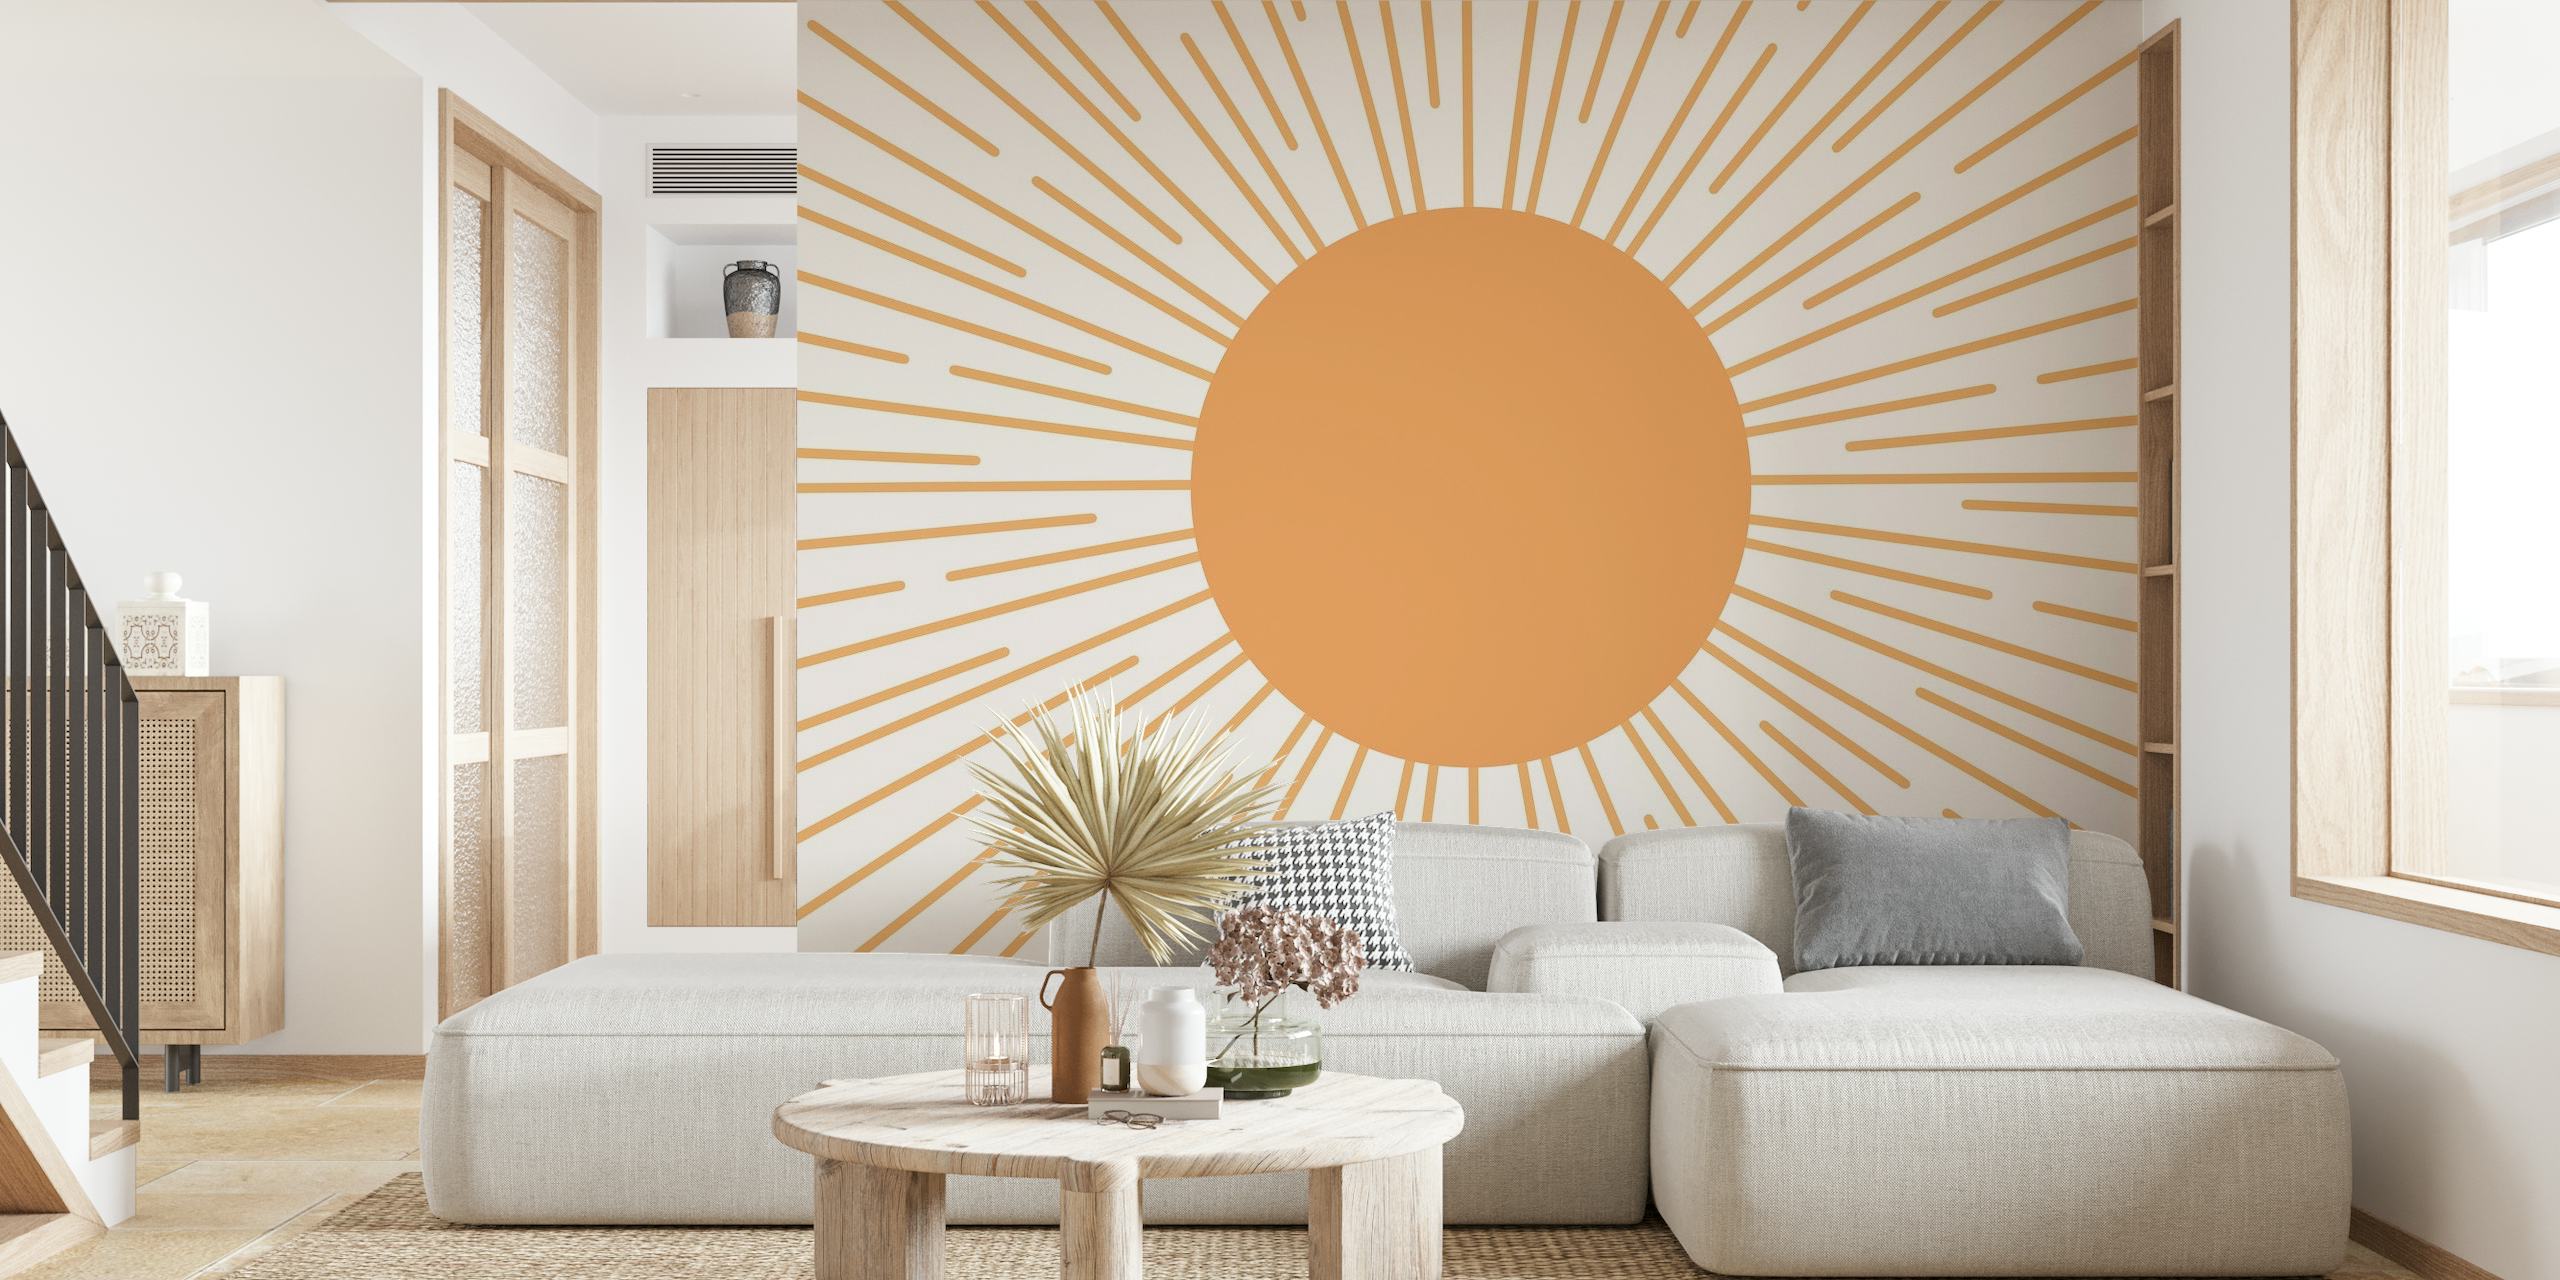 Sunburst pattern wall mural with warm beige center and radiant cream lines on a light background